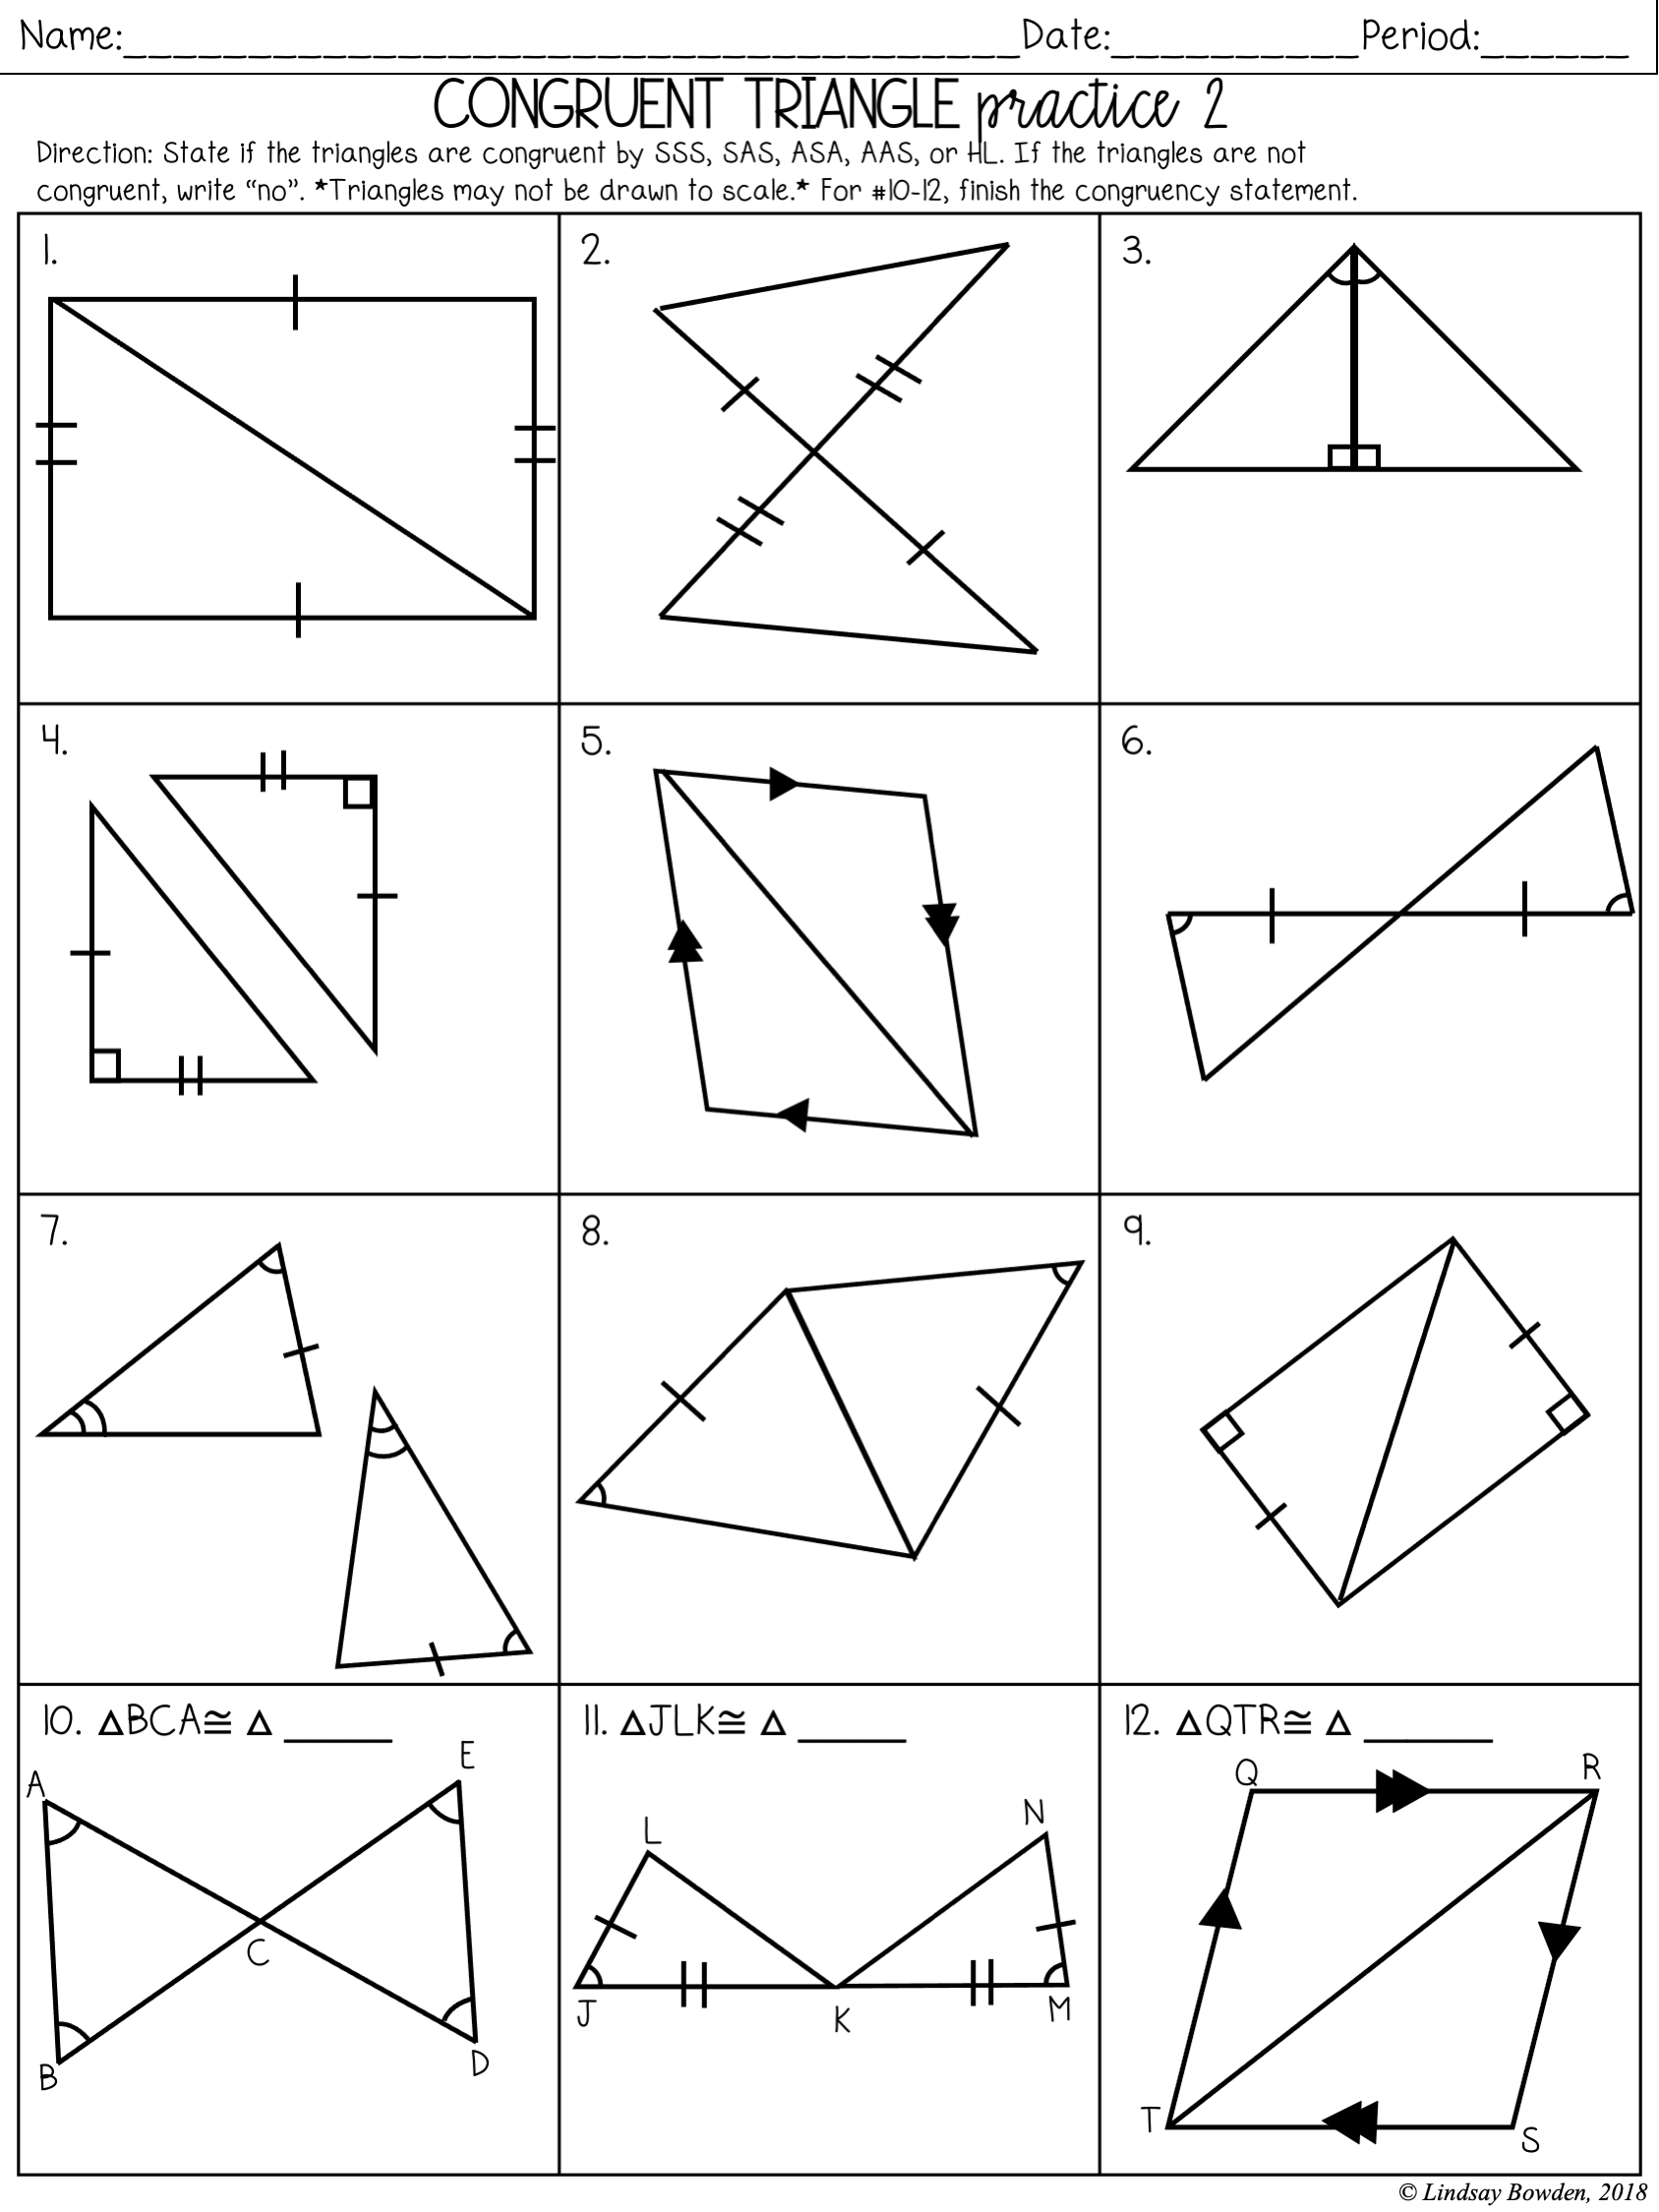 Congruent Triangles Notes and Worksheets - Lindsay Bowden Intended For Geometry Worksheet Congruent Triangles